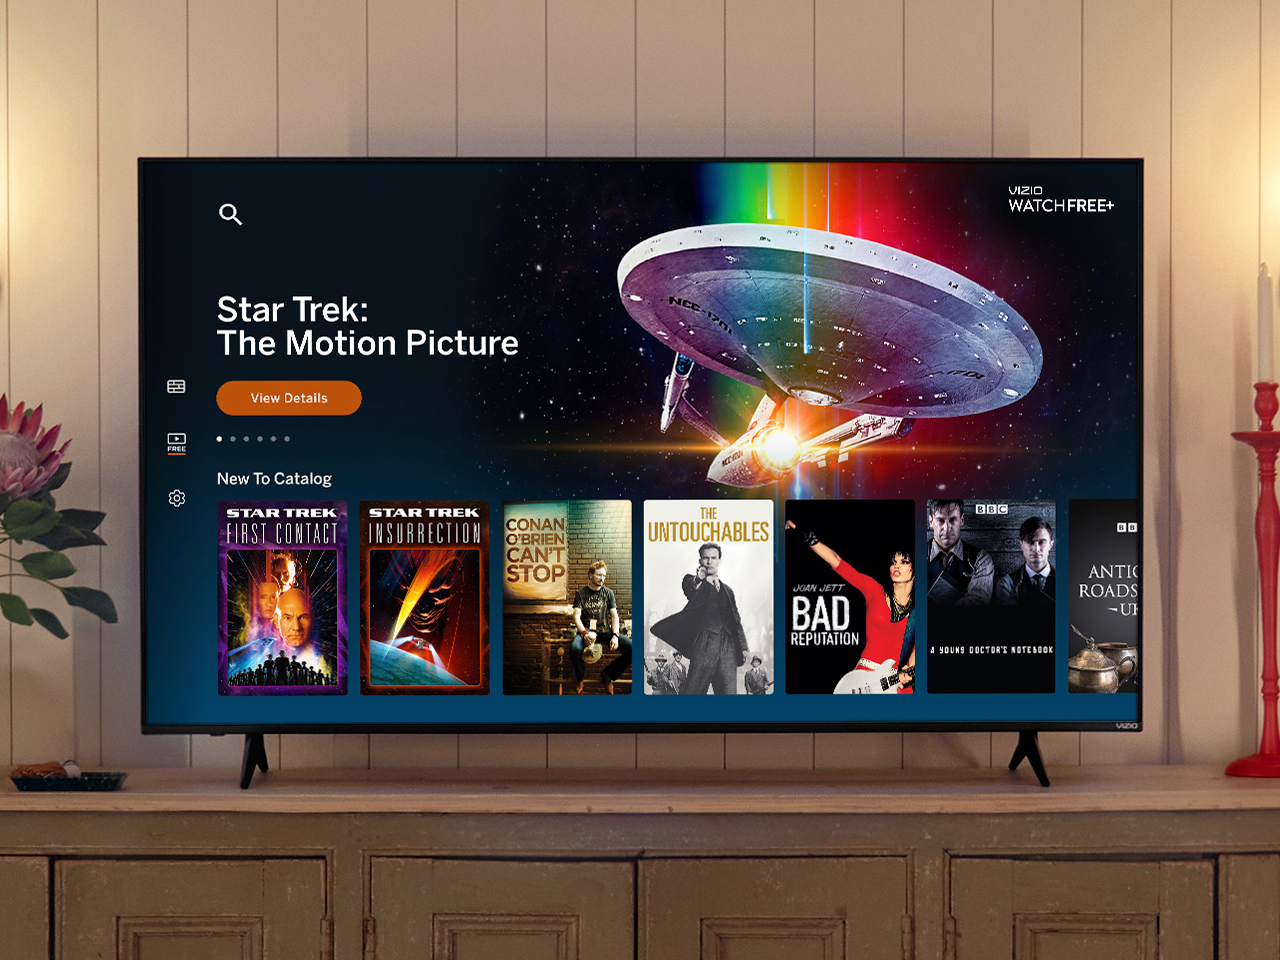 VIZIO Loads Up on Free Shows and Movies From BBC, Paramount, and Magnolia